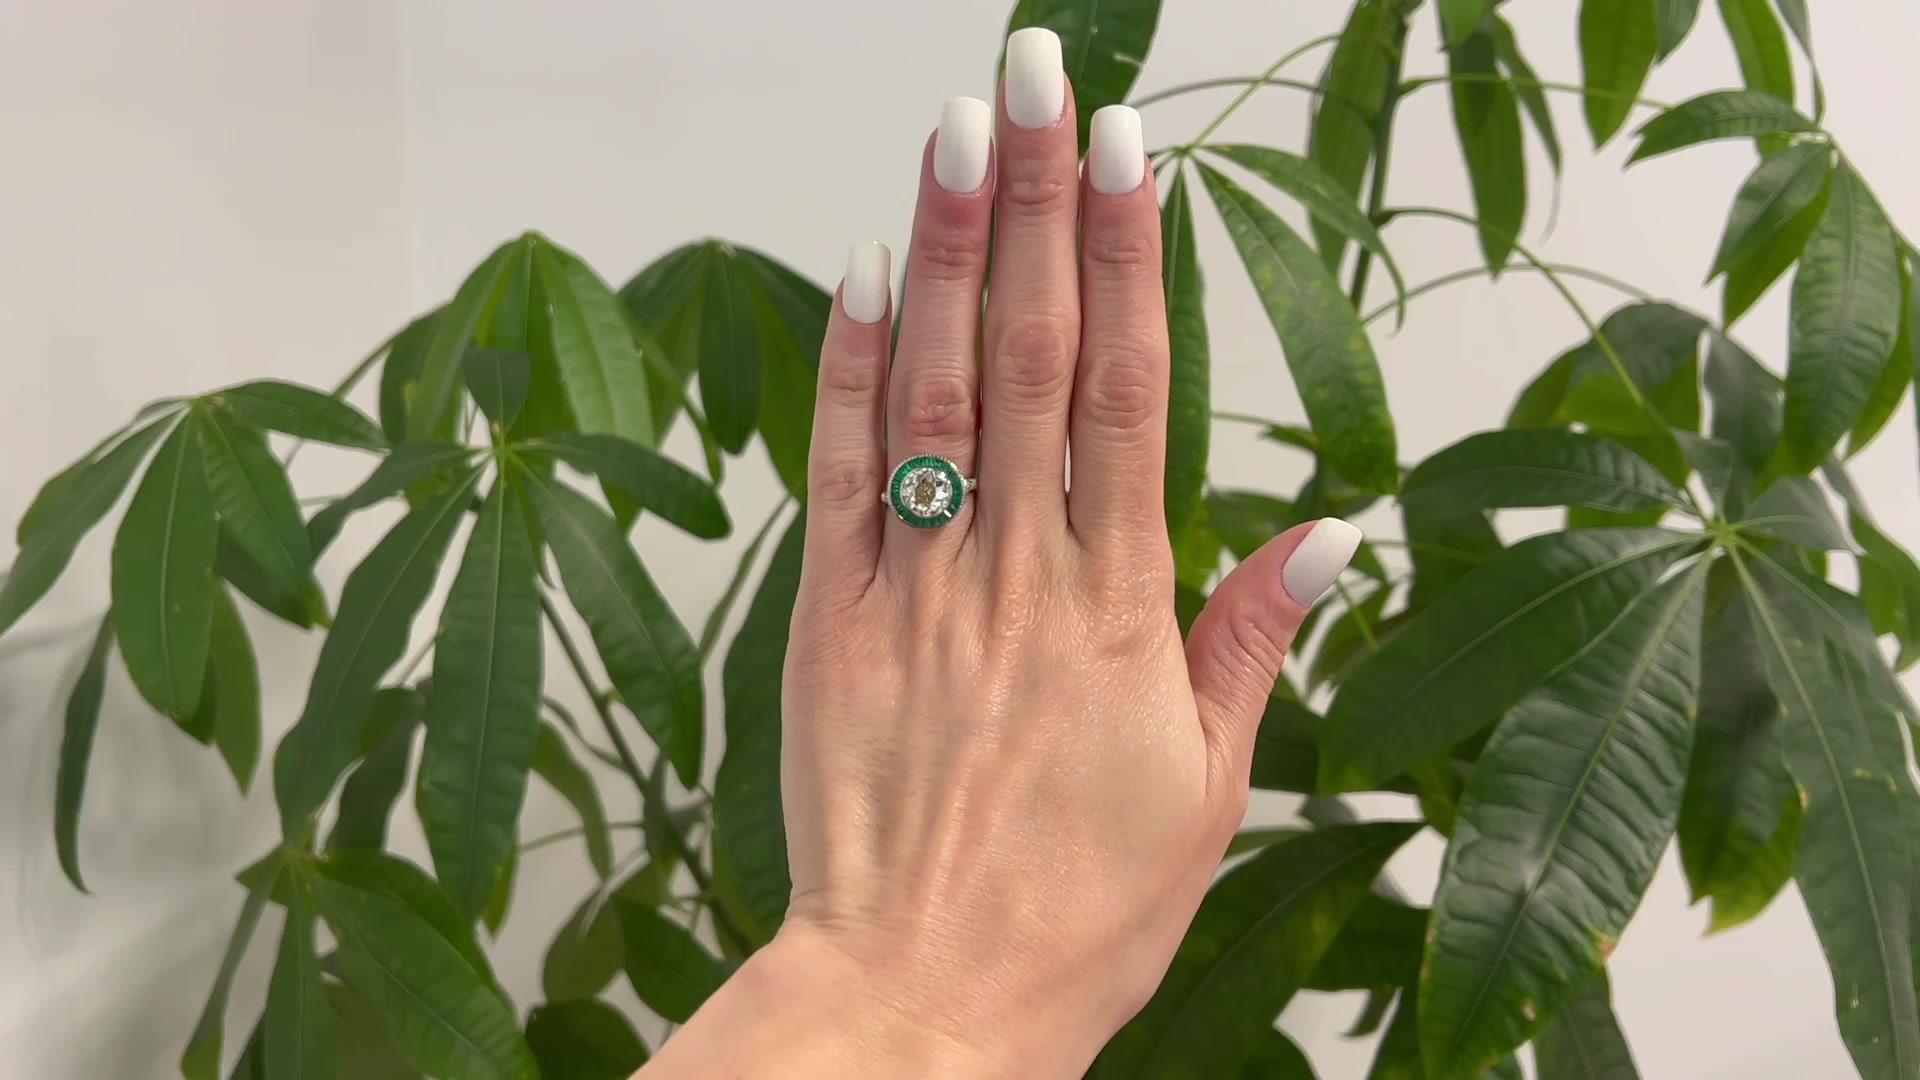 One Art Deco Inspired 2.51 Carats Old European Cut Diamond Emerald 14k White Gold Target Ring. Featuring one old European cut diamond of 2.51 carats, graded O-P color, SI2 clarity. Accented by 25 calibré cut emeralds with a total weight of